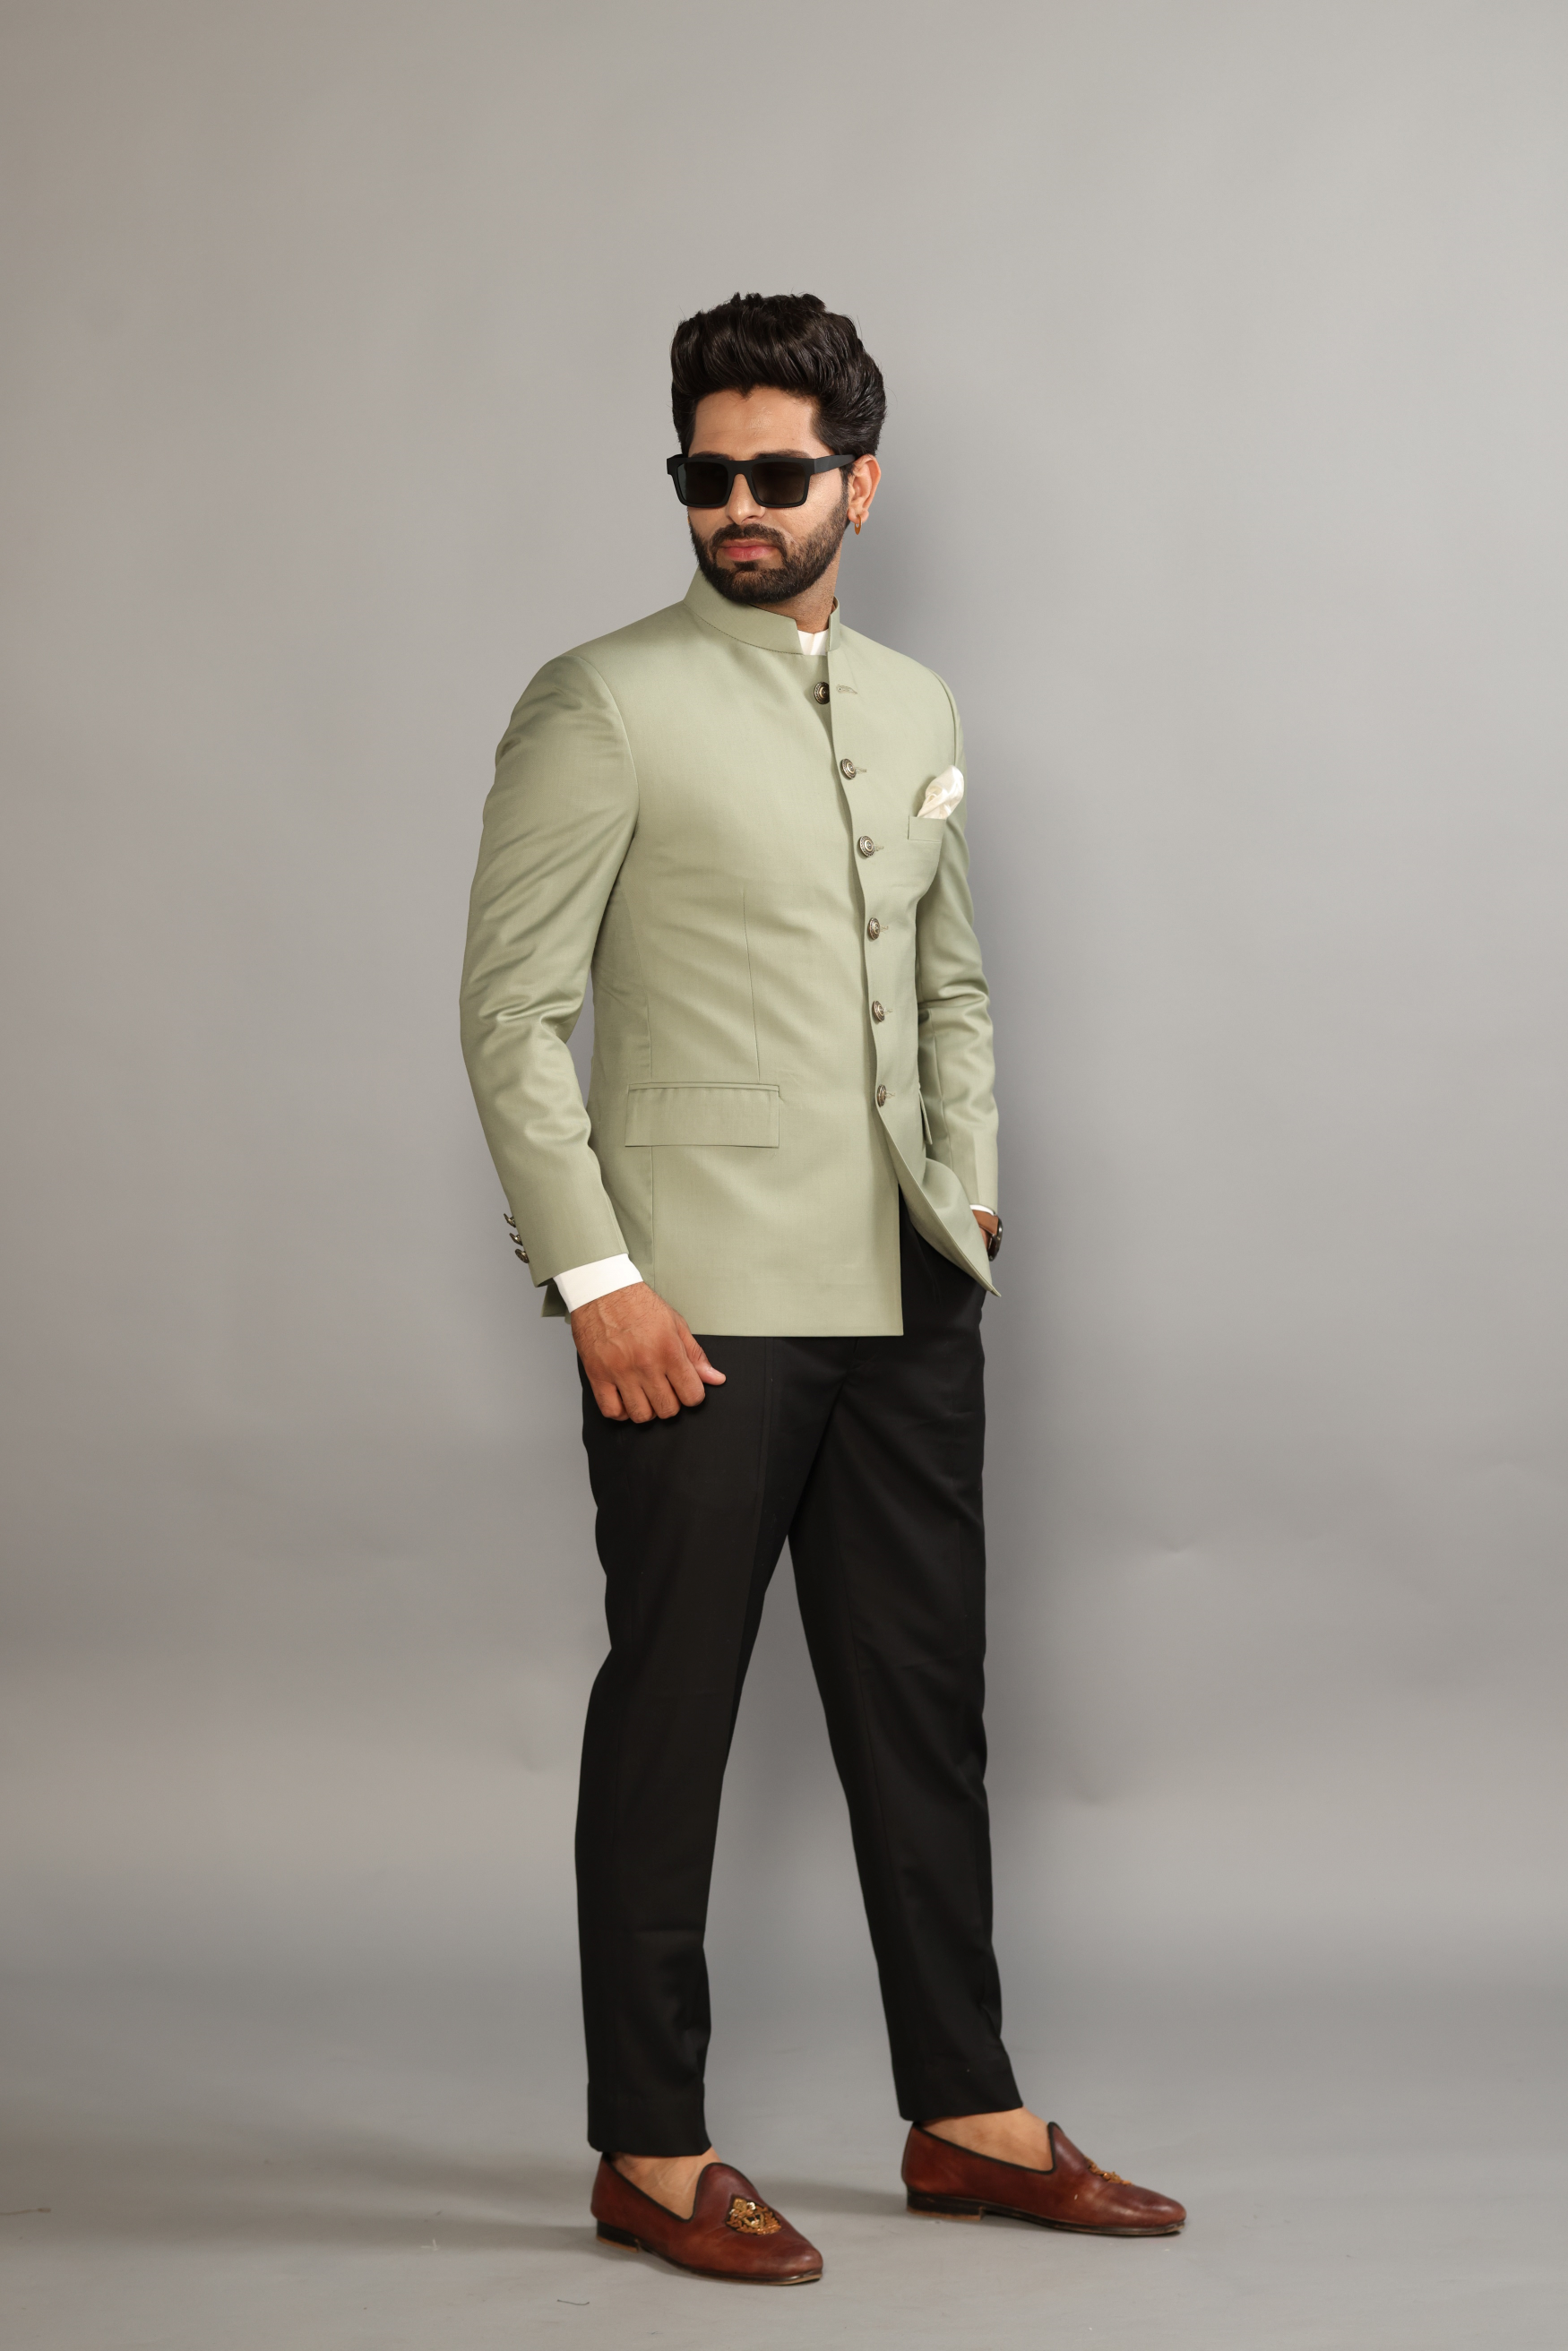 Alluring Moss Green Royal Jodhpuri Bandhgala with Black Trouser | Perfect for Formal Events , Weddings, Formal Party | Free Personalization|